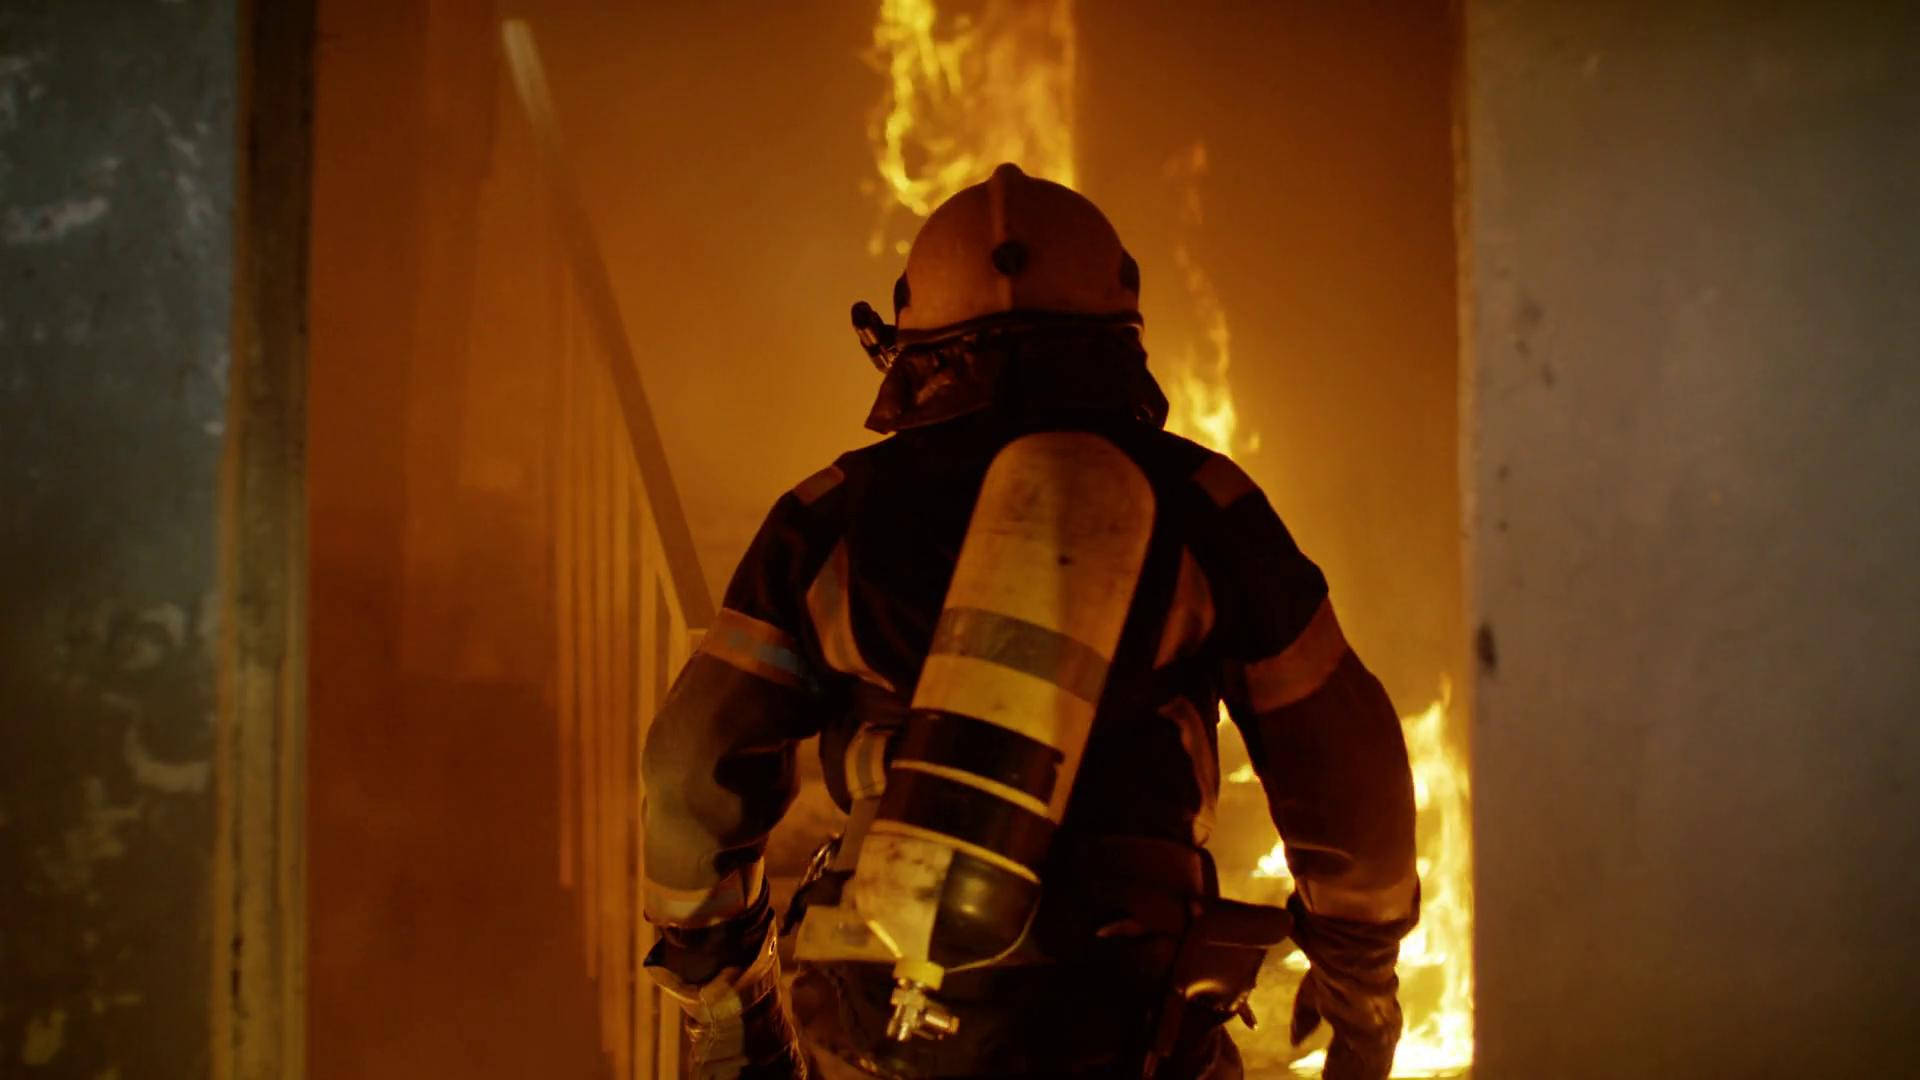 Firefighter On The Stairs Wallpaper